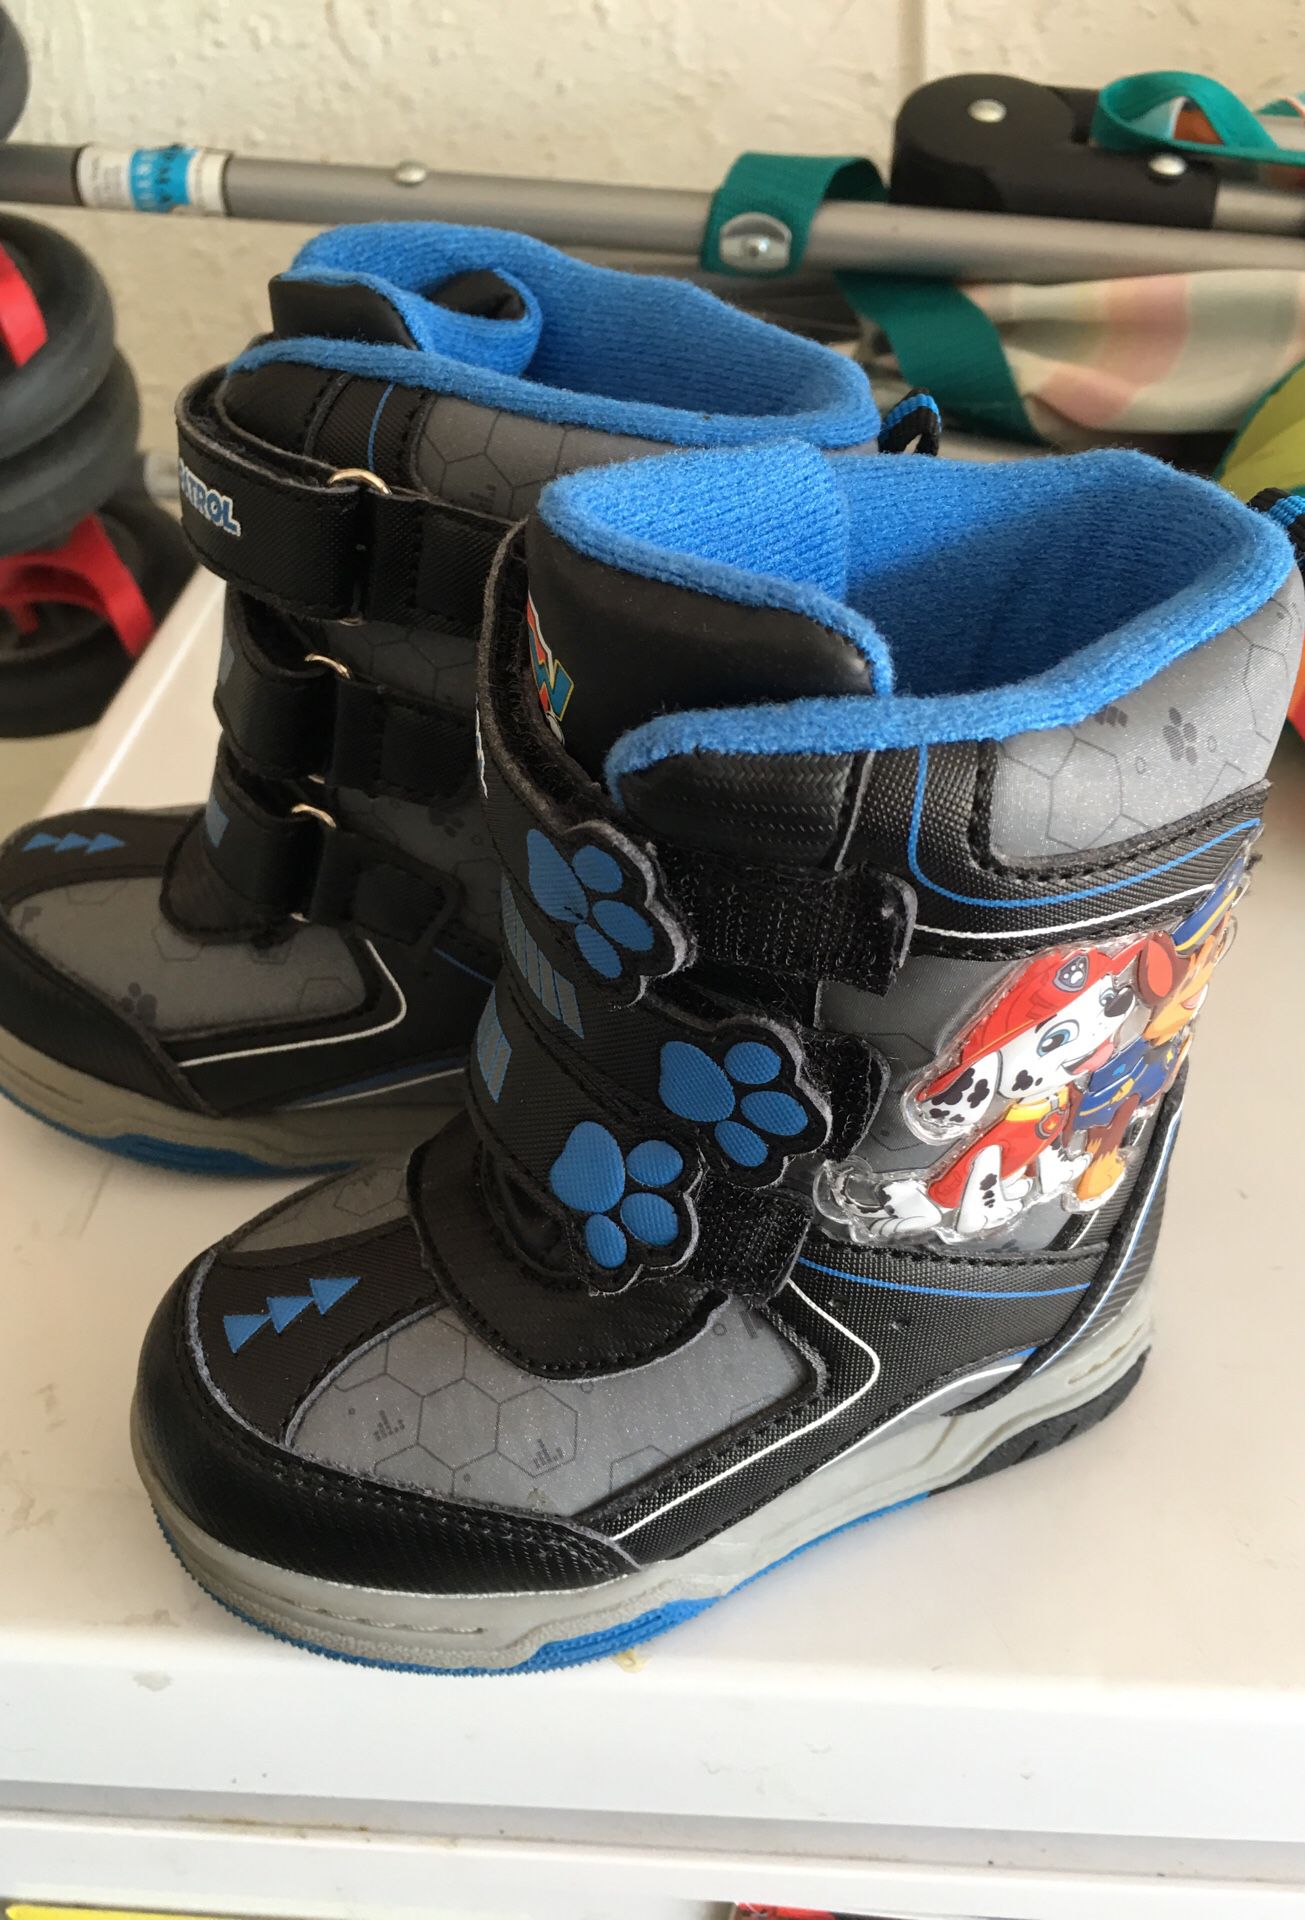 Toddler snow boots paw patrol